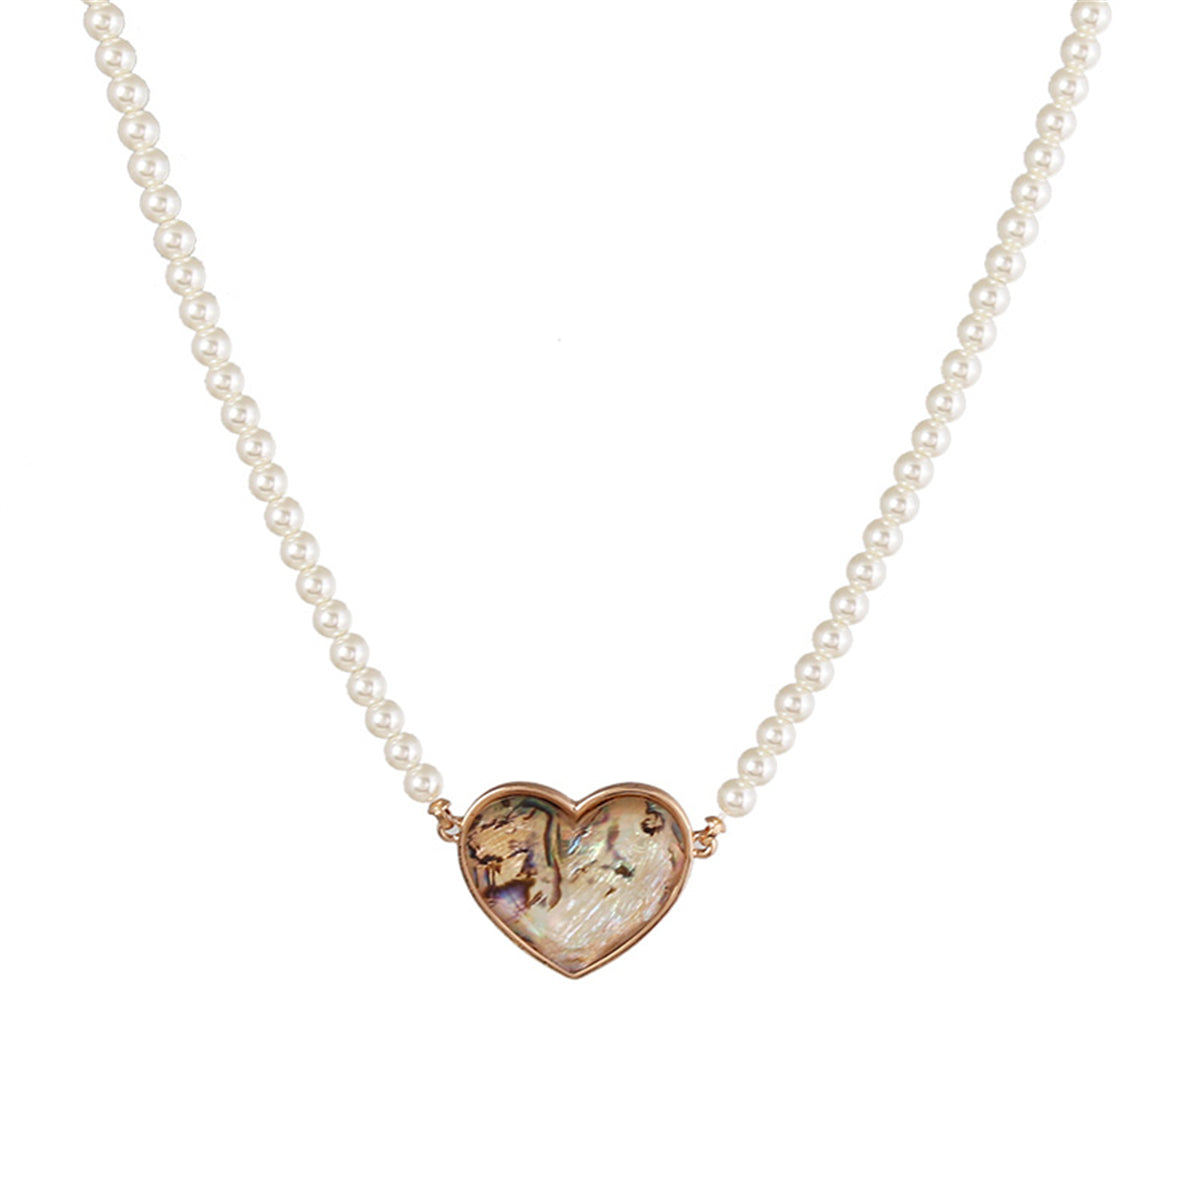 Abalone Shell & Pearl 18K Gold-Plated Heart Pendant Necklace